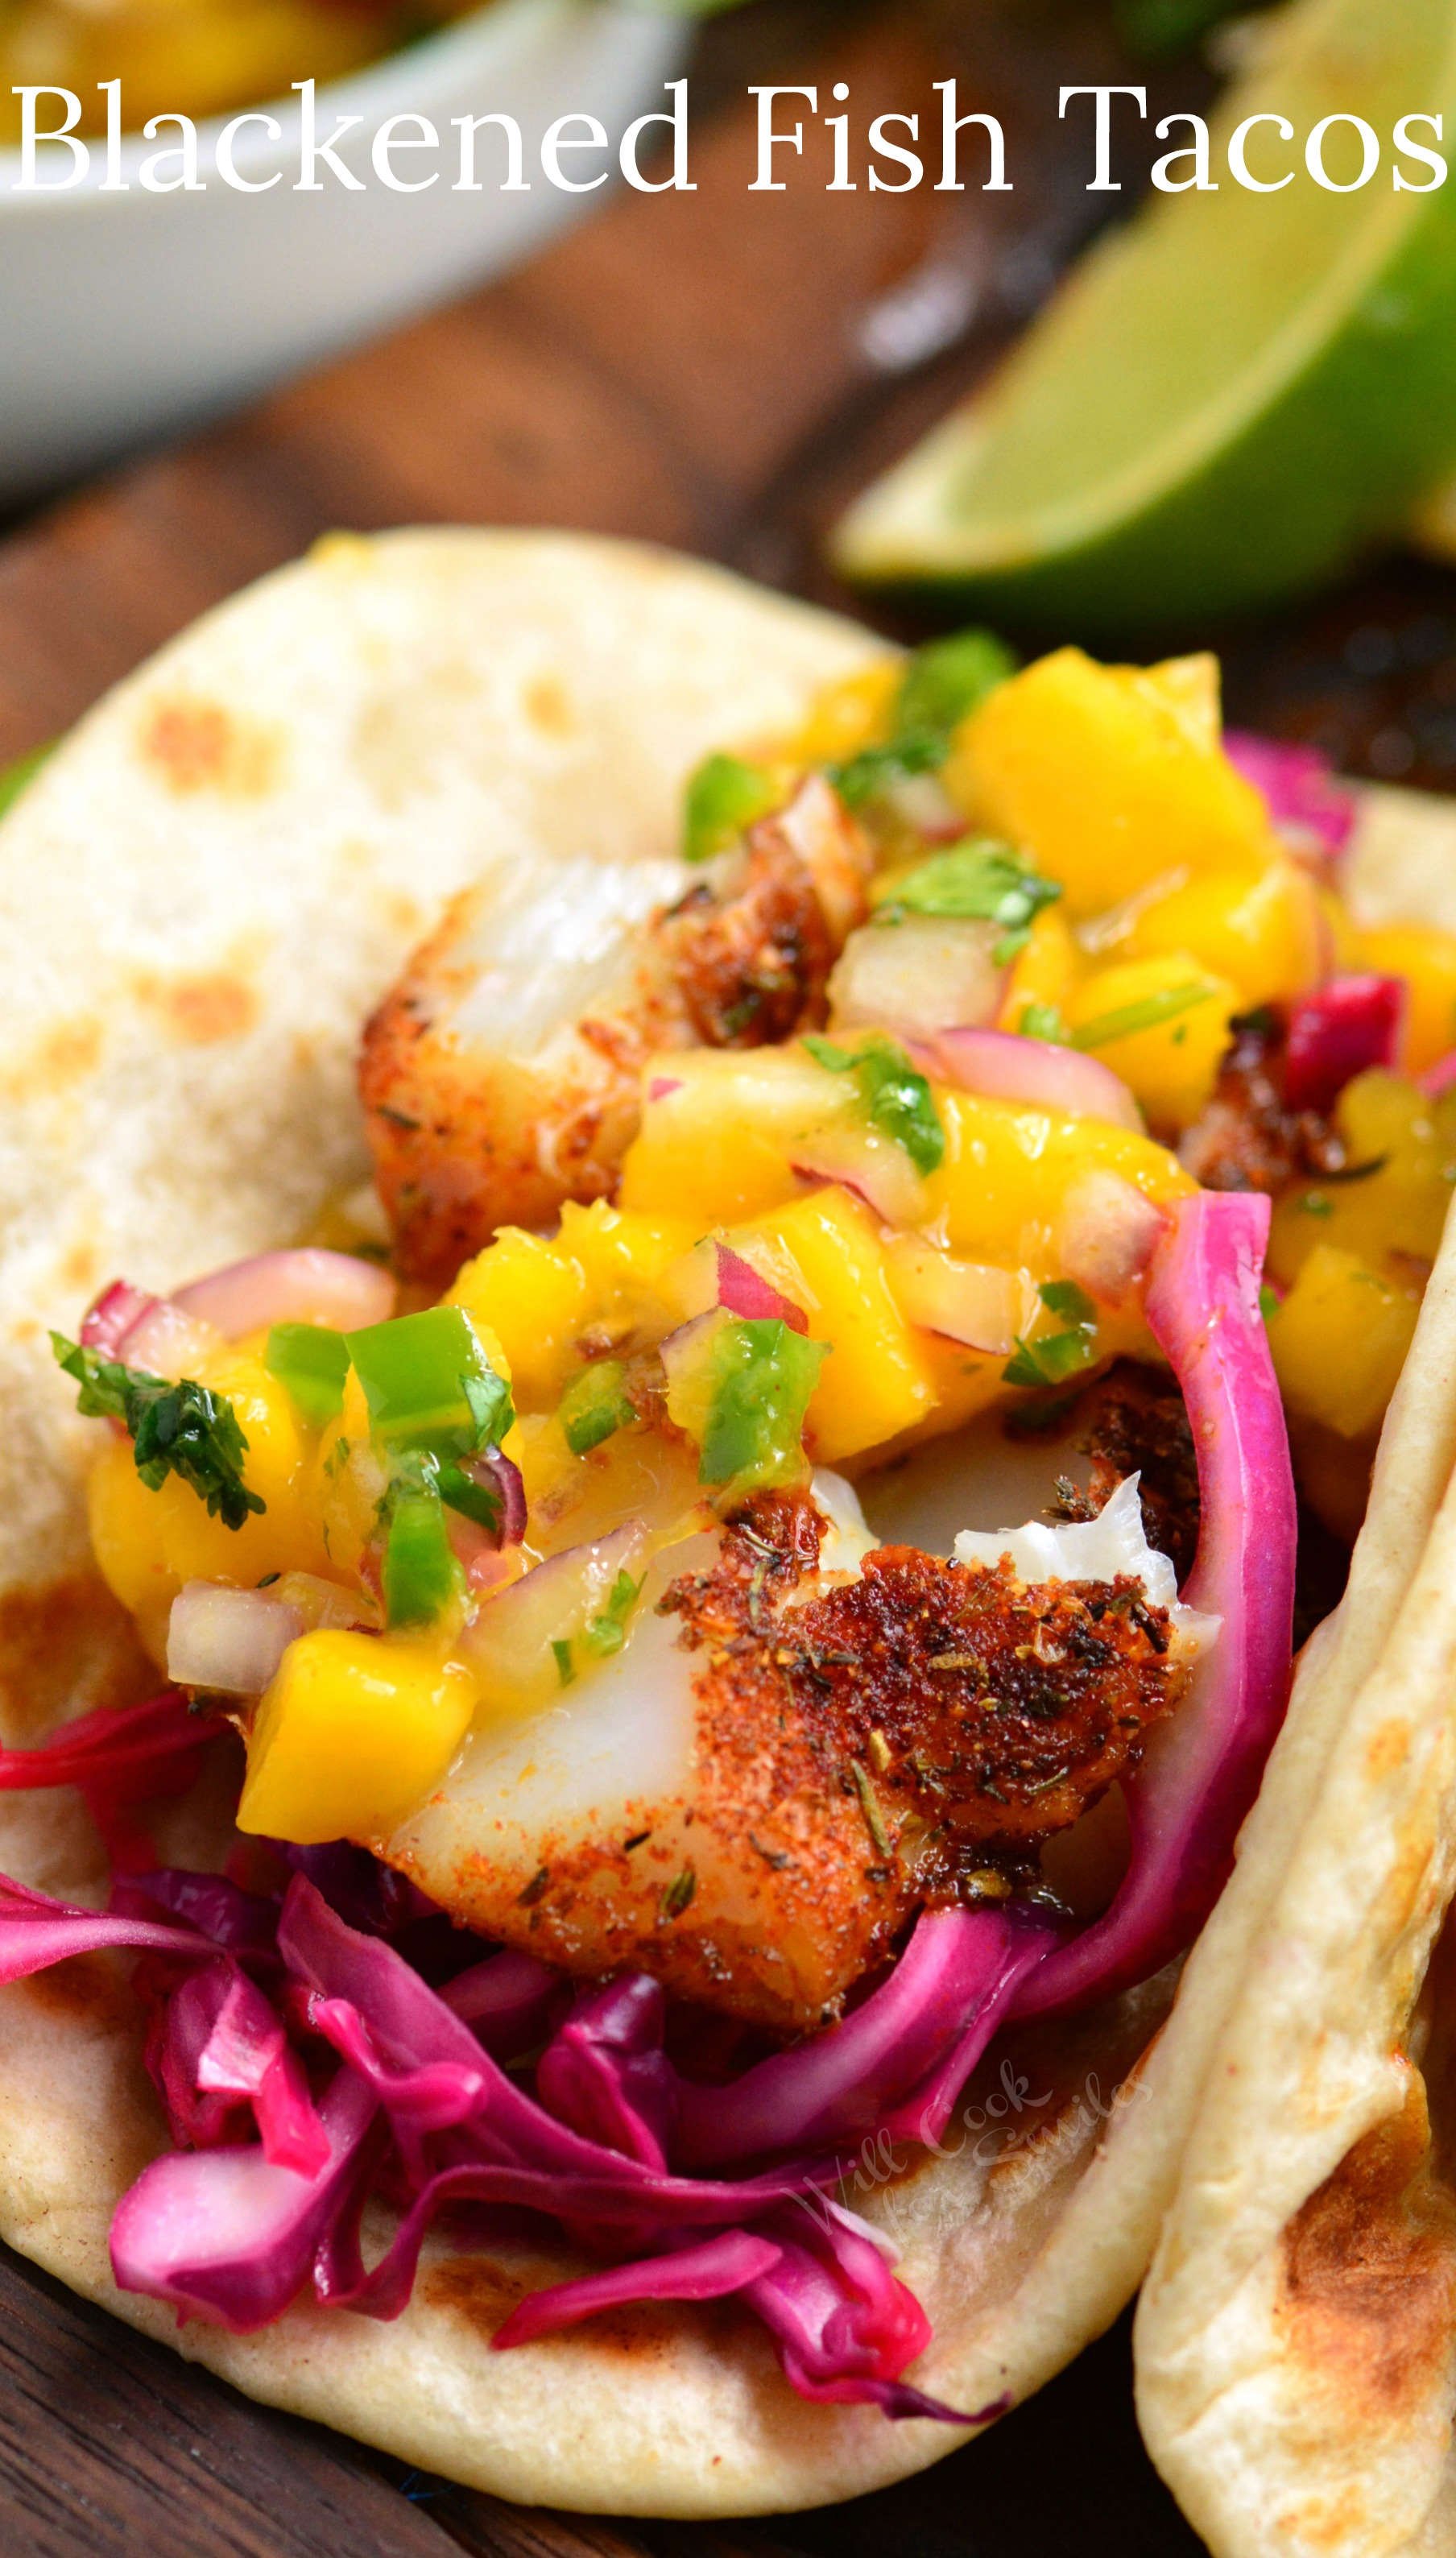 soft taco shell with blackened white fish and mango salsa on top.